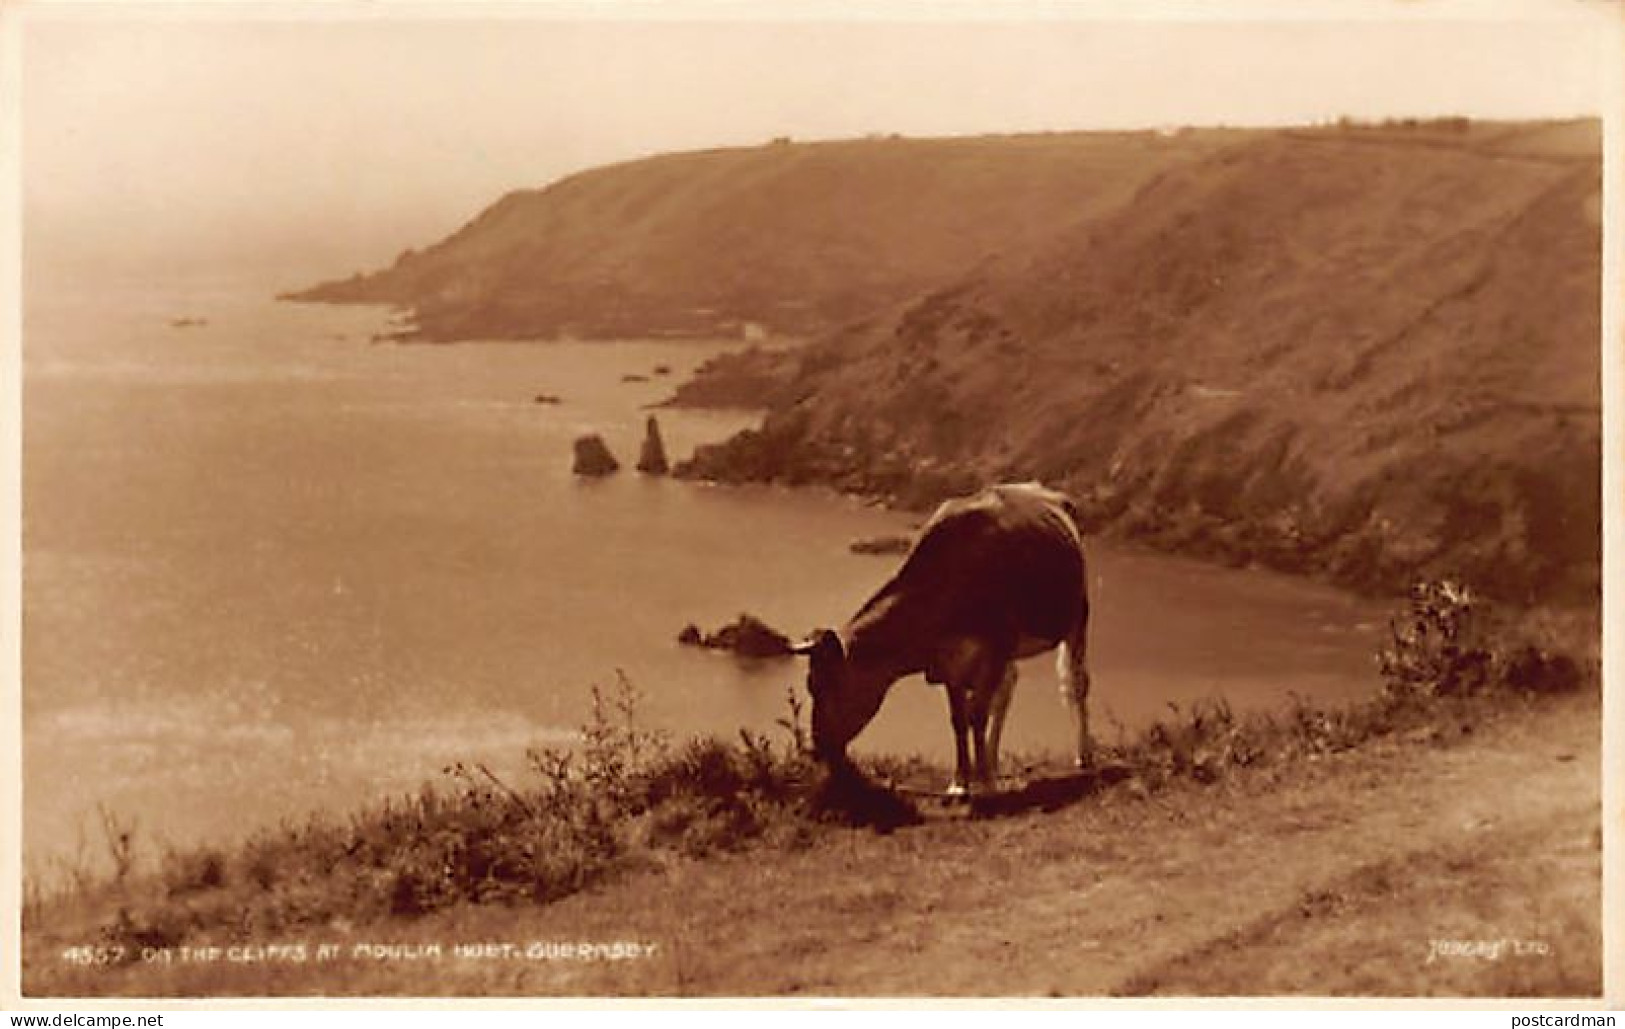 Guernsey - On The Cliffs At Mouley Huet - REAL PHOTO - Publ. Judges Ltd. 4557 - Guernsey